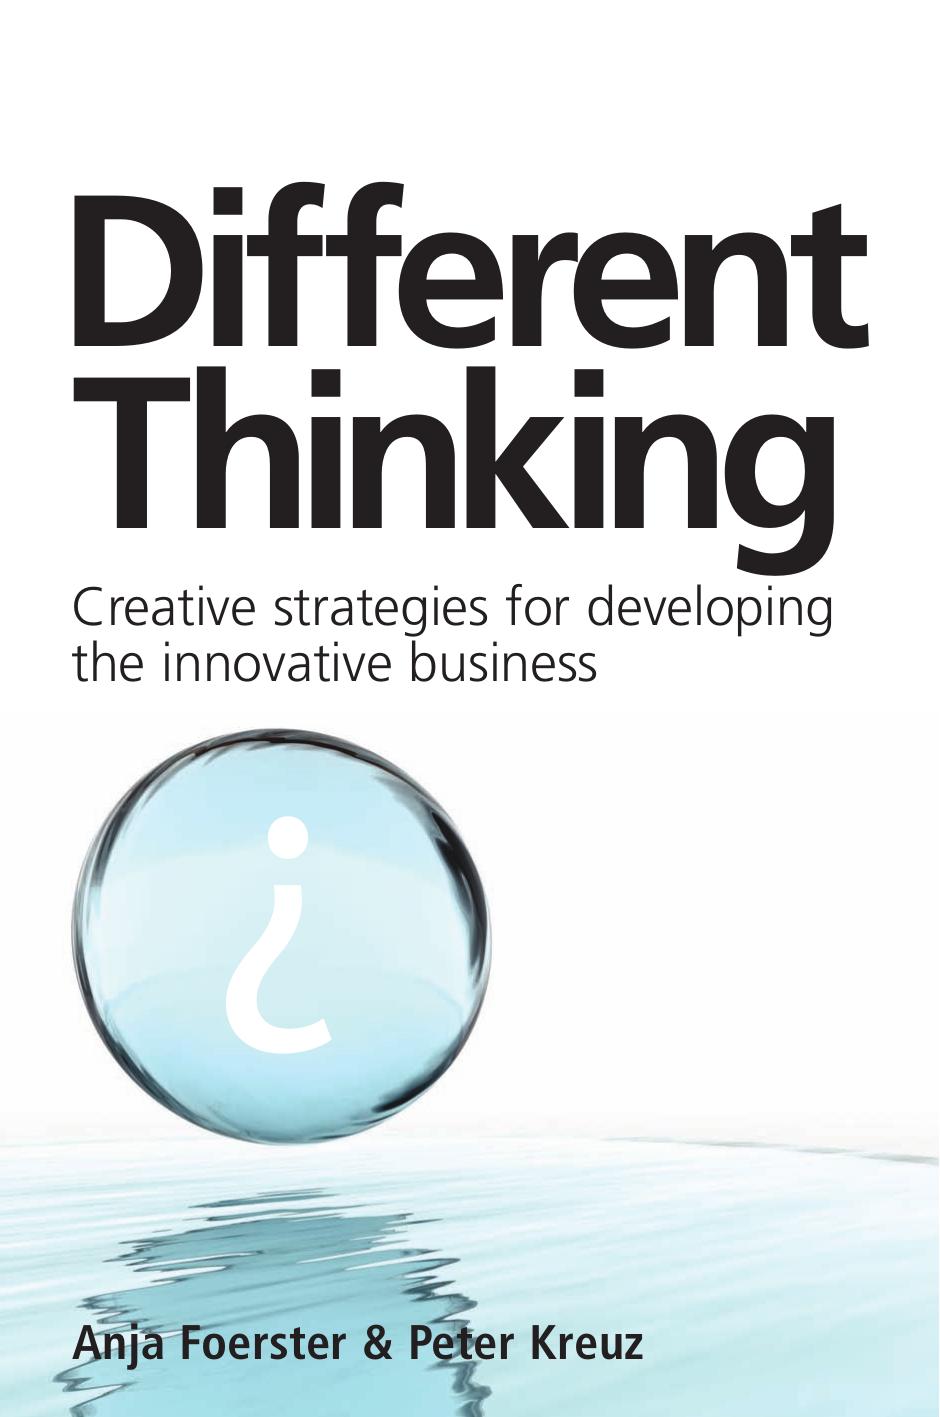 Different thinking: creative strategies for developing the innovative business